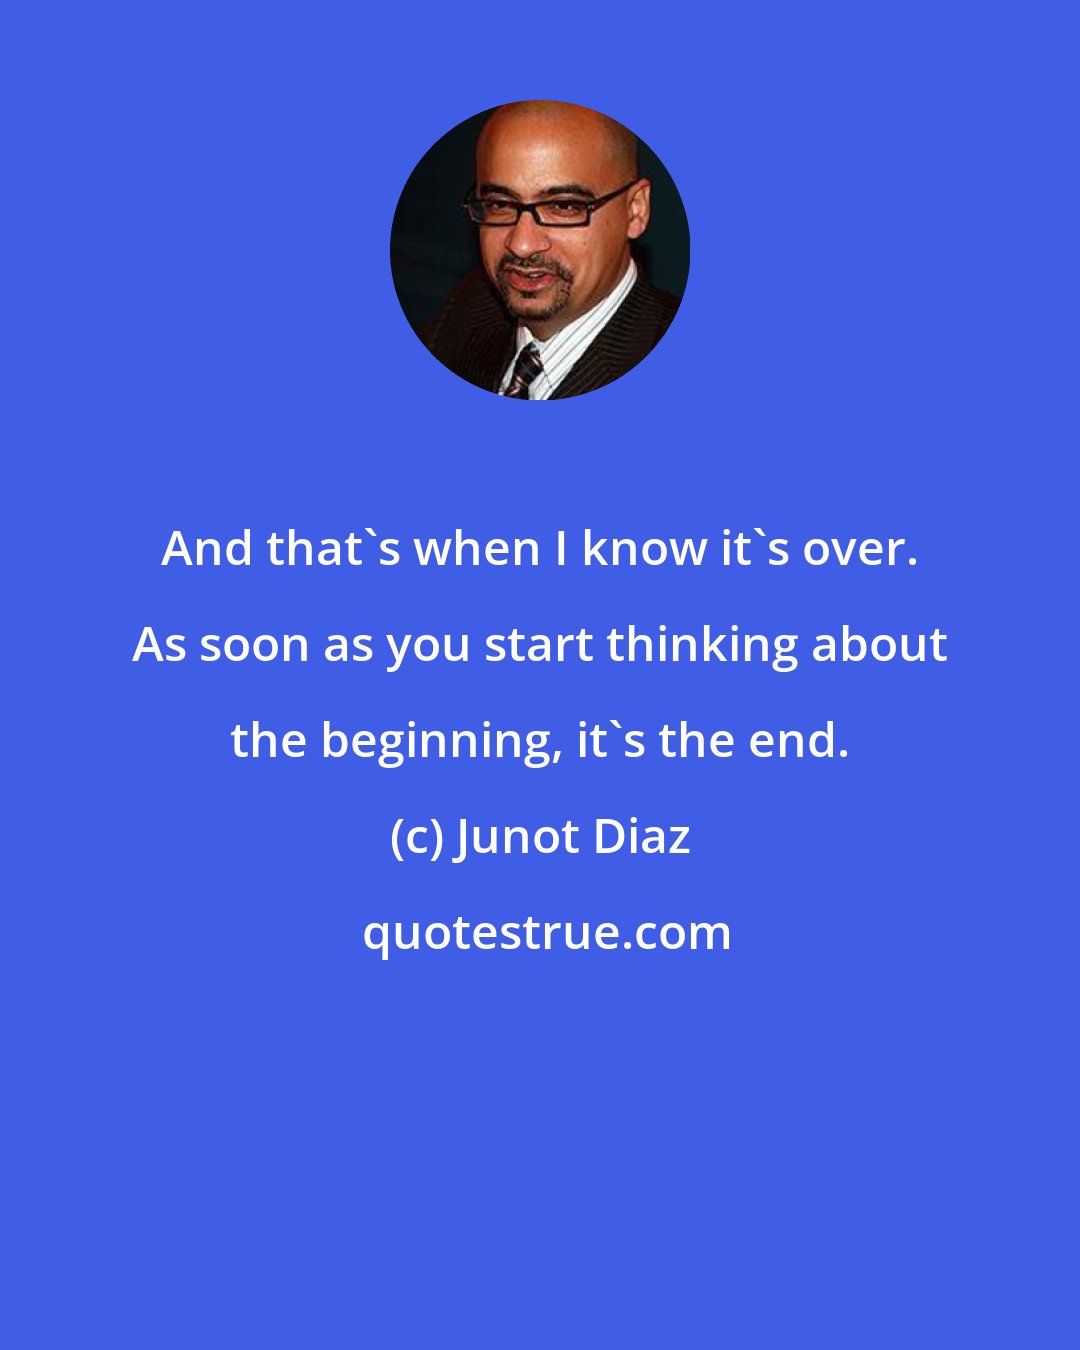 Junot Diaz: And that's when I know it's over. As soon as you start thinking about the beginning, it's the end.